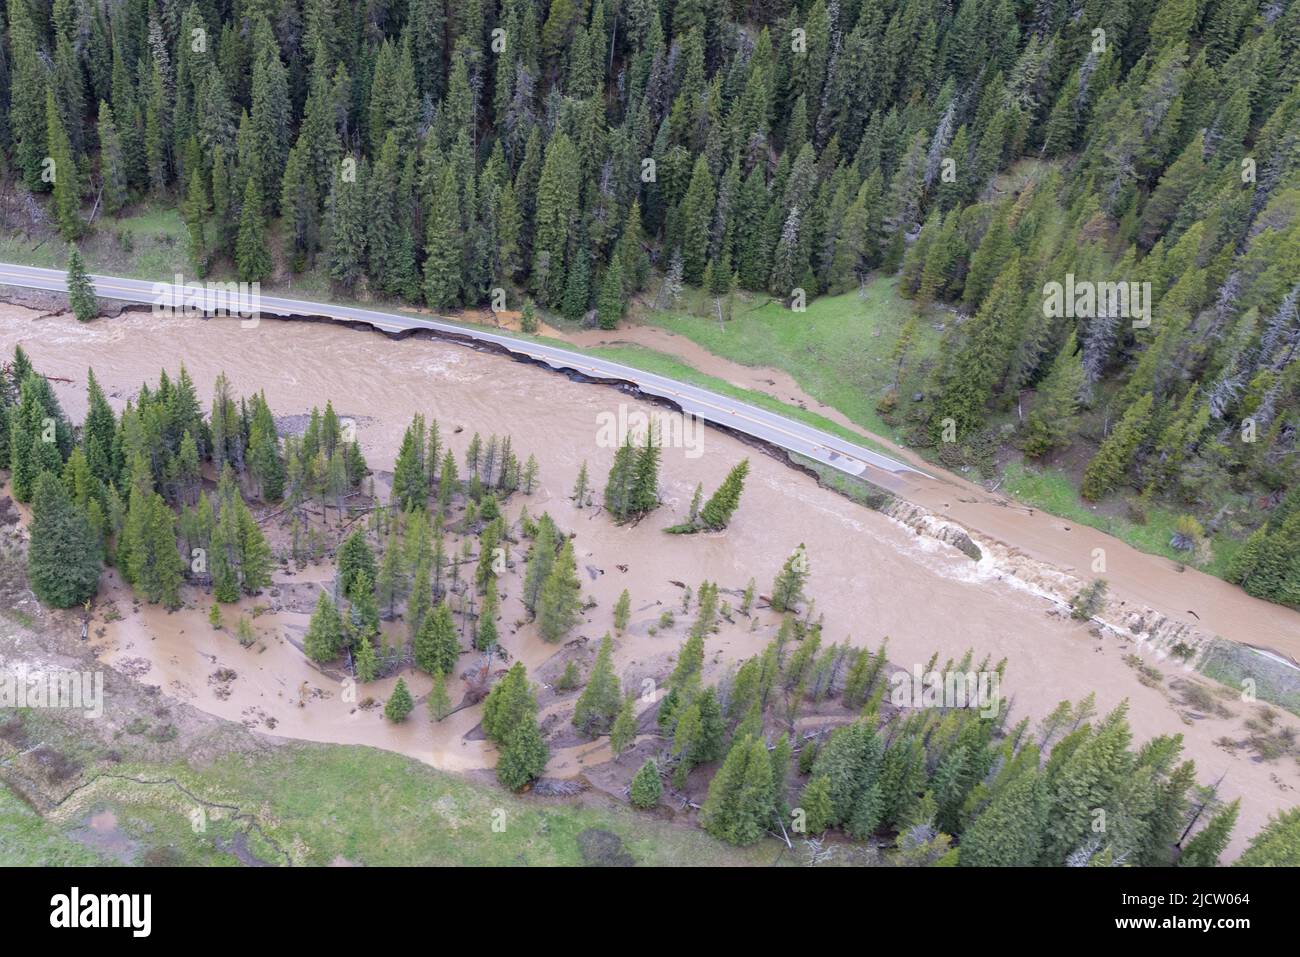 Yellowstone, United States. 13th June, 2022. The northeast entrance of Yellowstone National Park is washed out after record rains and snow melt caused destructive floods closing the park at the start of the busy season, June 13, 2022 in Yellowstone, Montana. Credit: Jacob W. Frank/NPS Photo/Alamy Live News Stock Photo